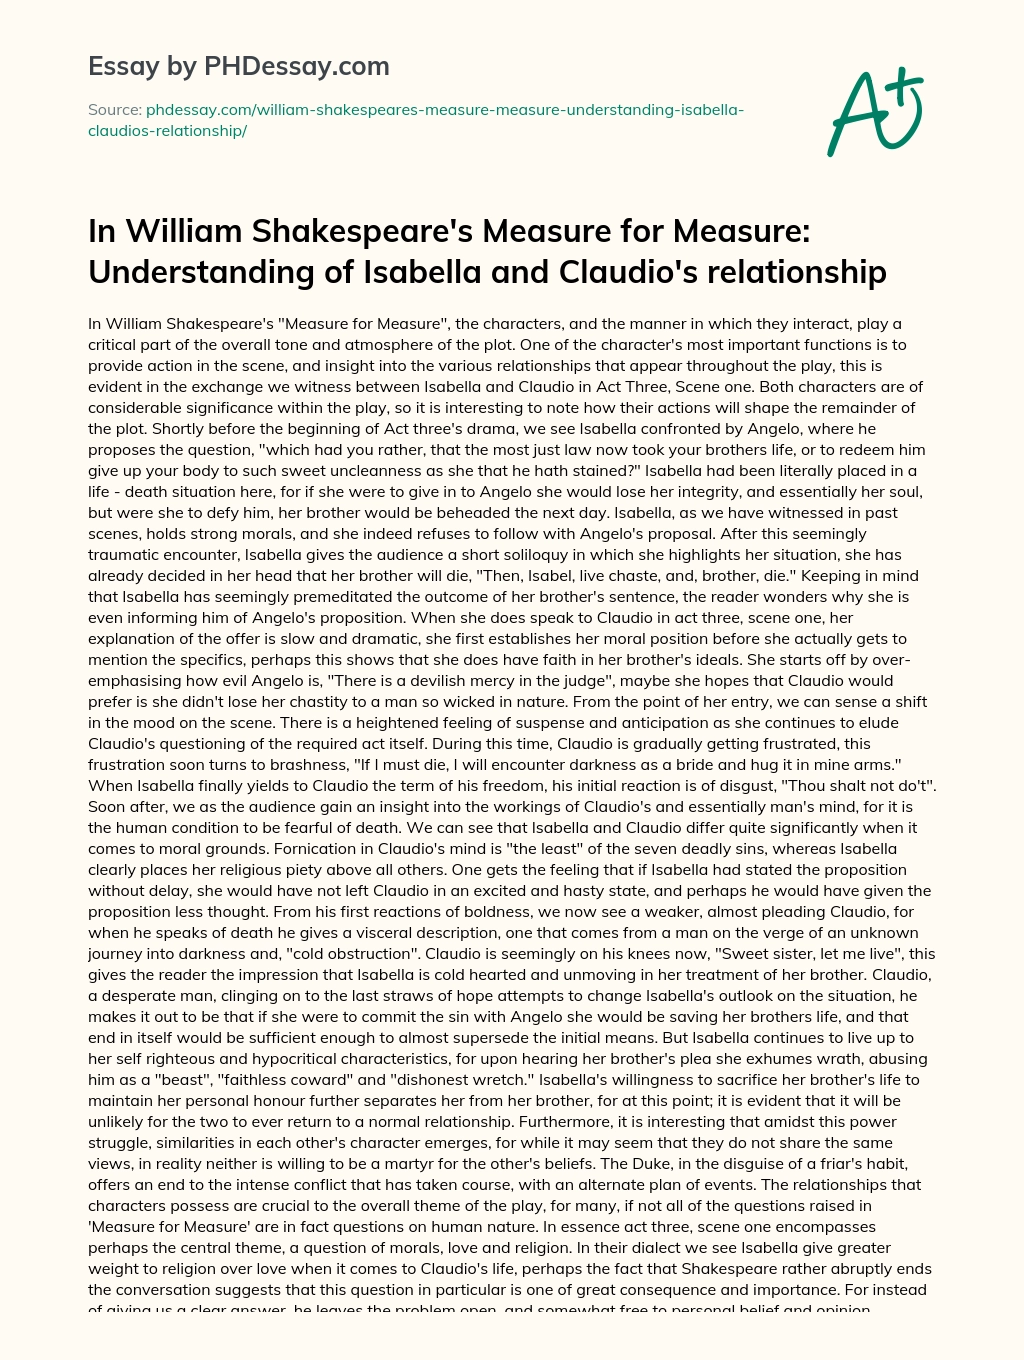 The Importance of Character Interaction in Shakespeare’s Measure for Measure essay